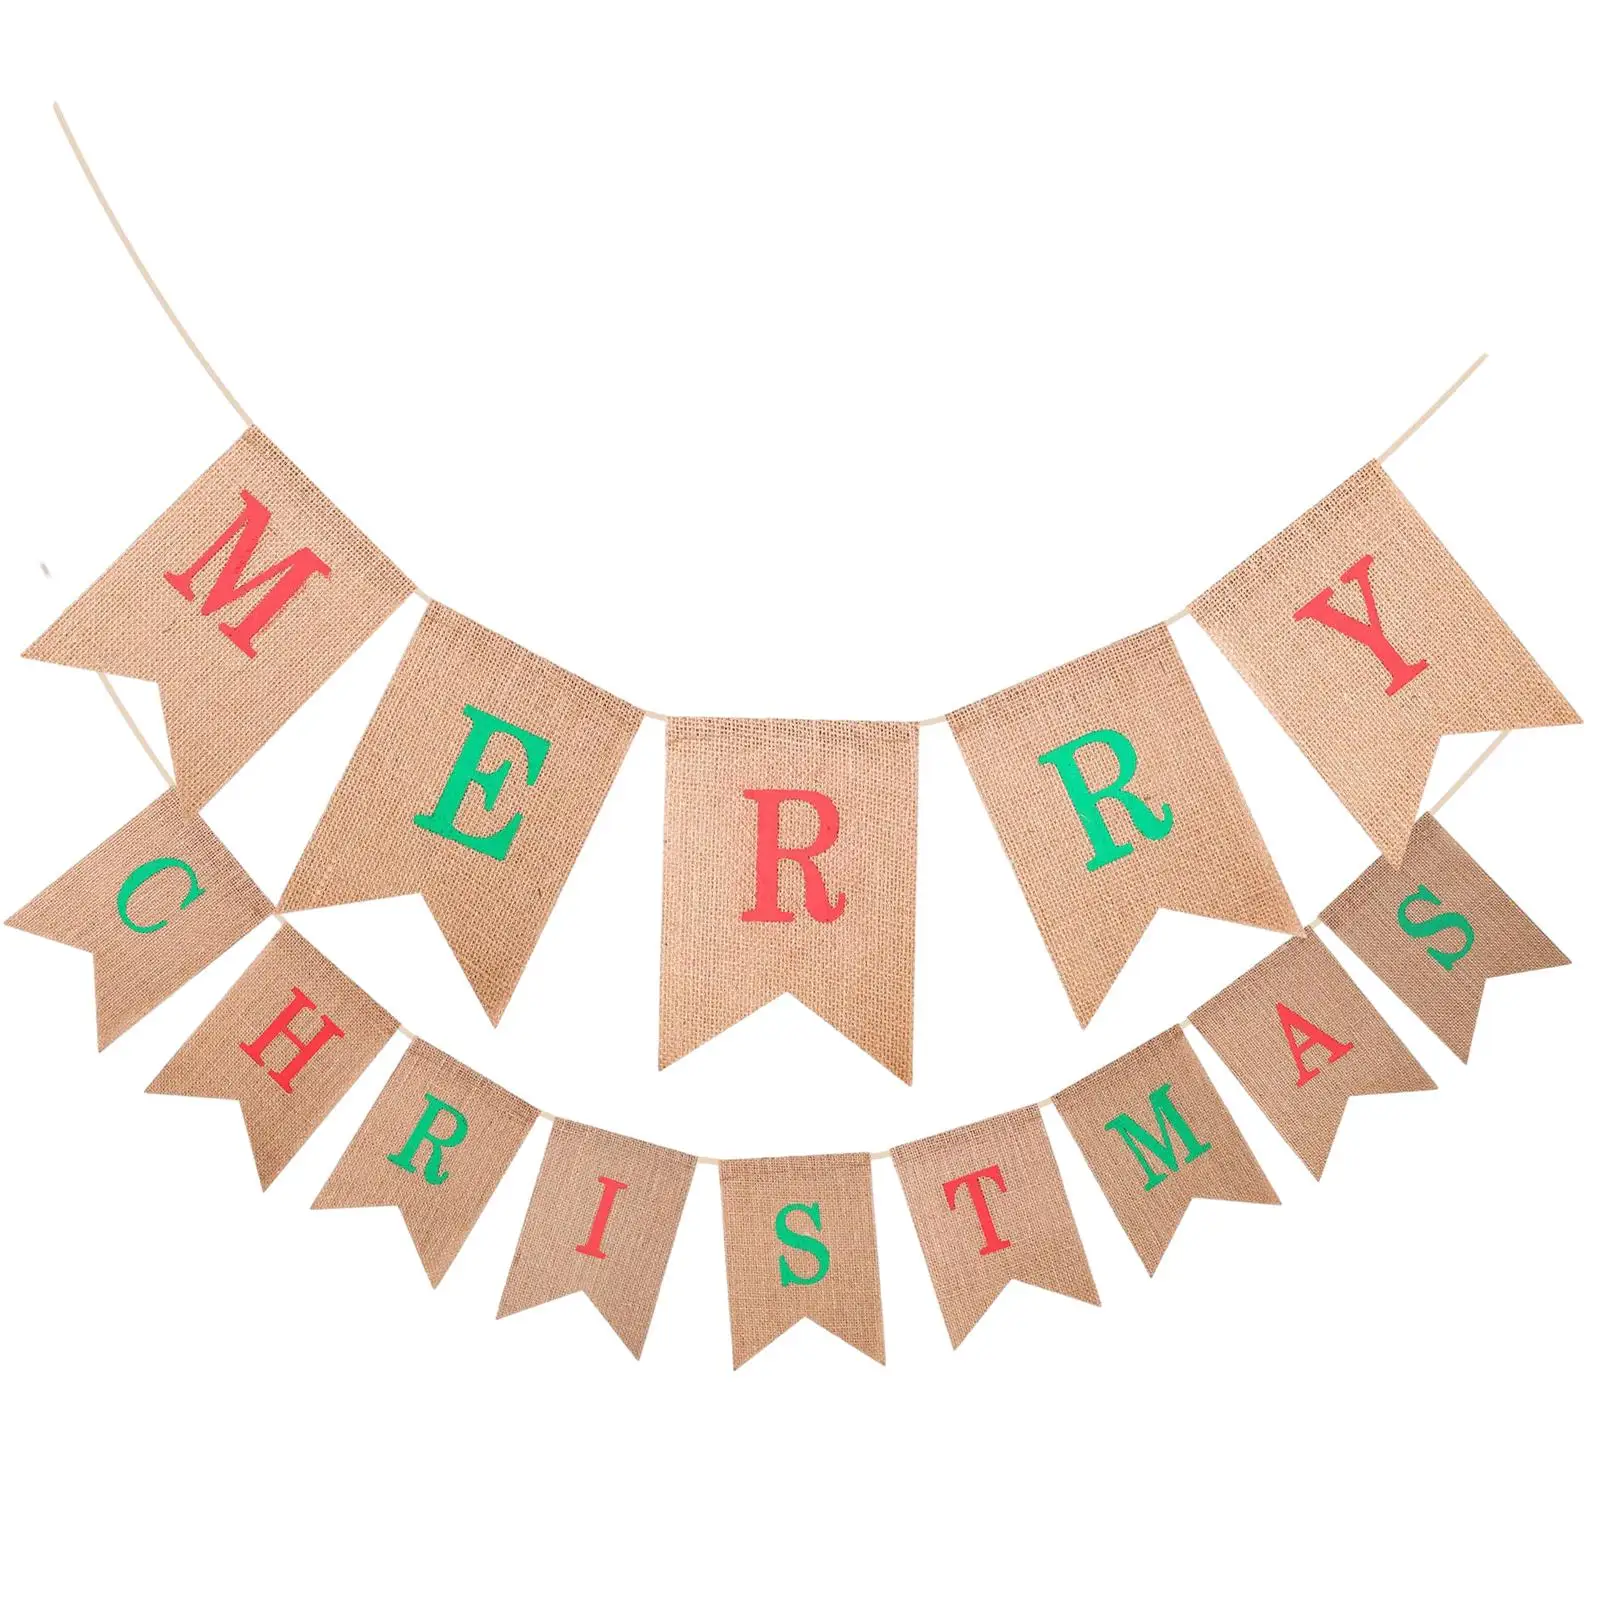 Merry Christmas Wall Hanging Banner DIY for Front Door Porch Party Supplies